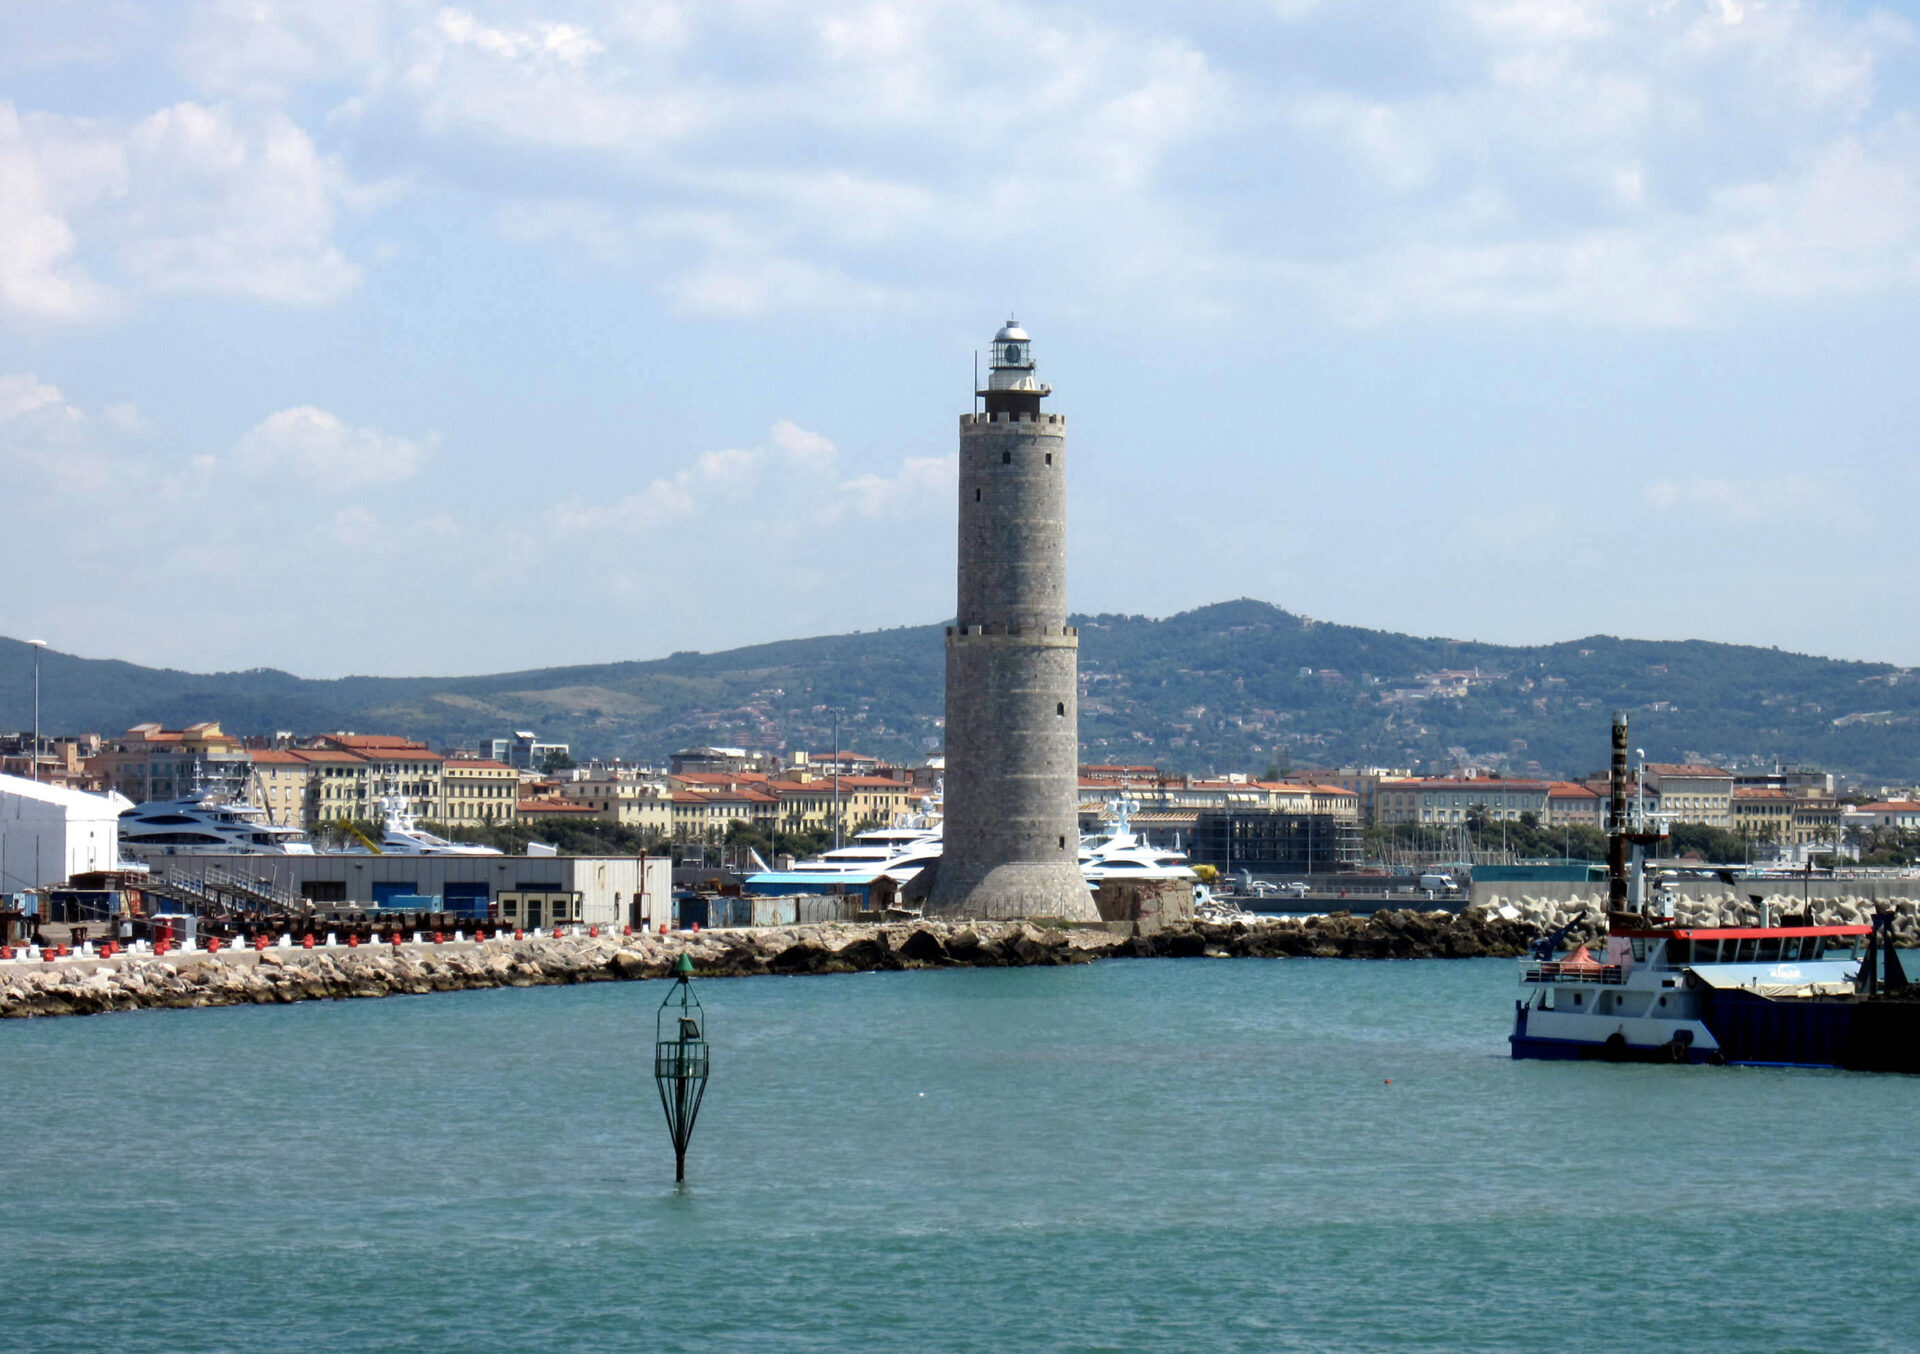 The towers of Livorno and Capraia